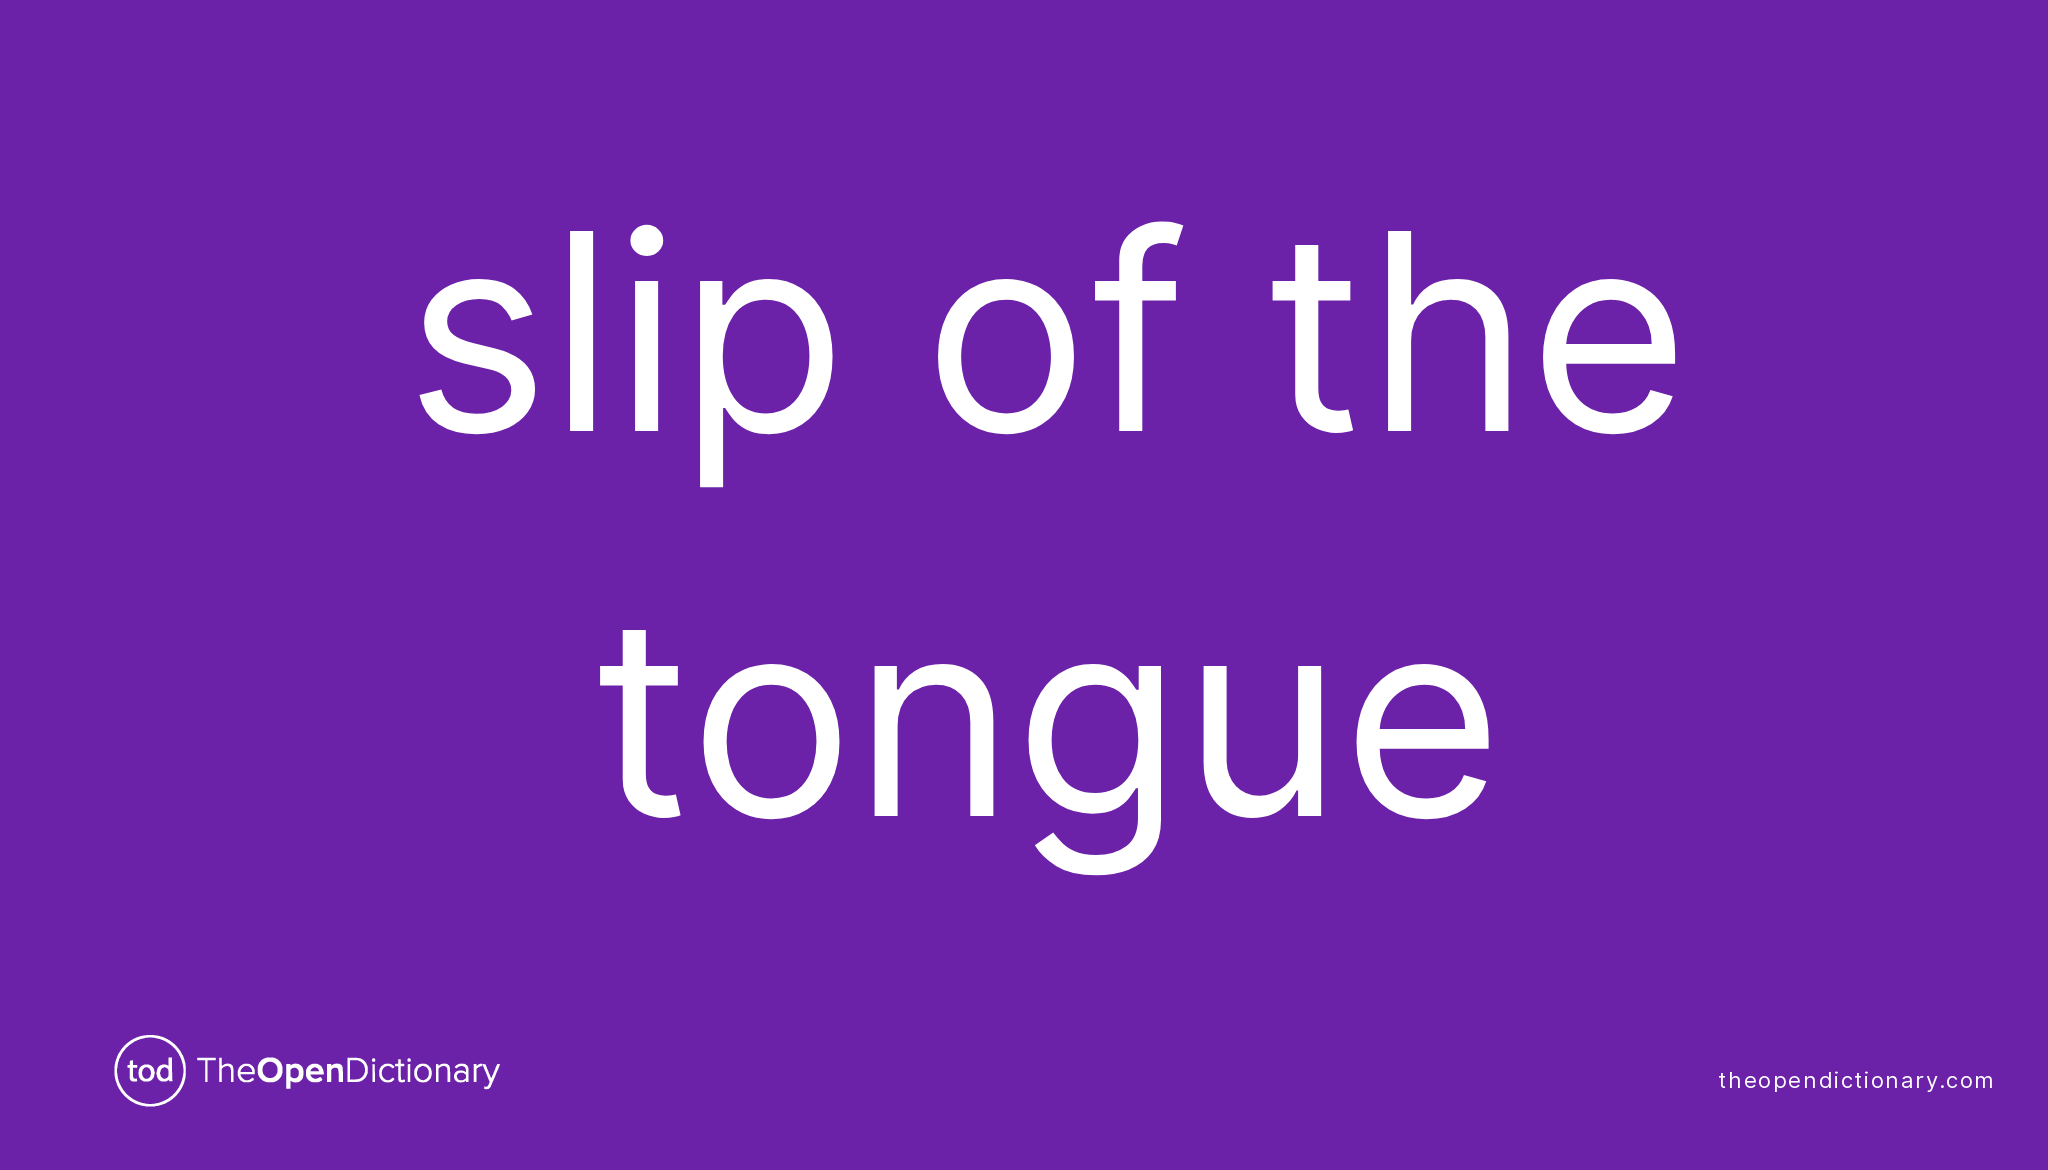 slip-of-the-tongue-meaning-of-slip-of-the-tongue-definition-of-slip